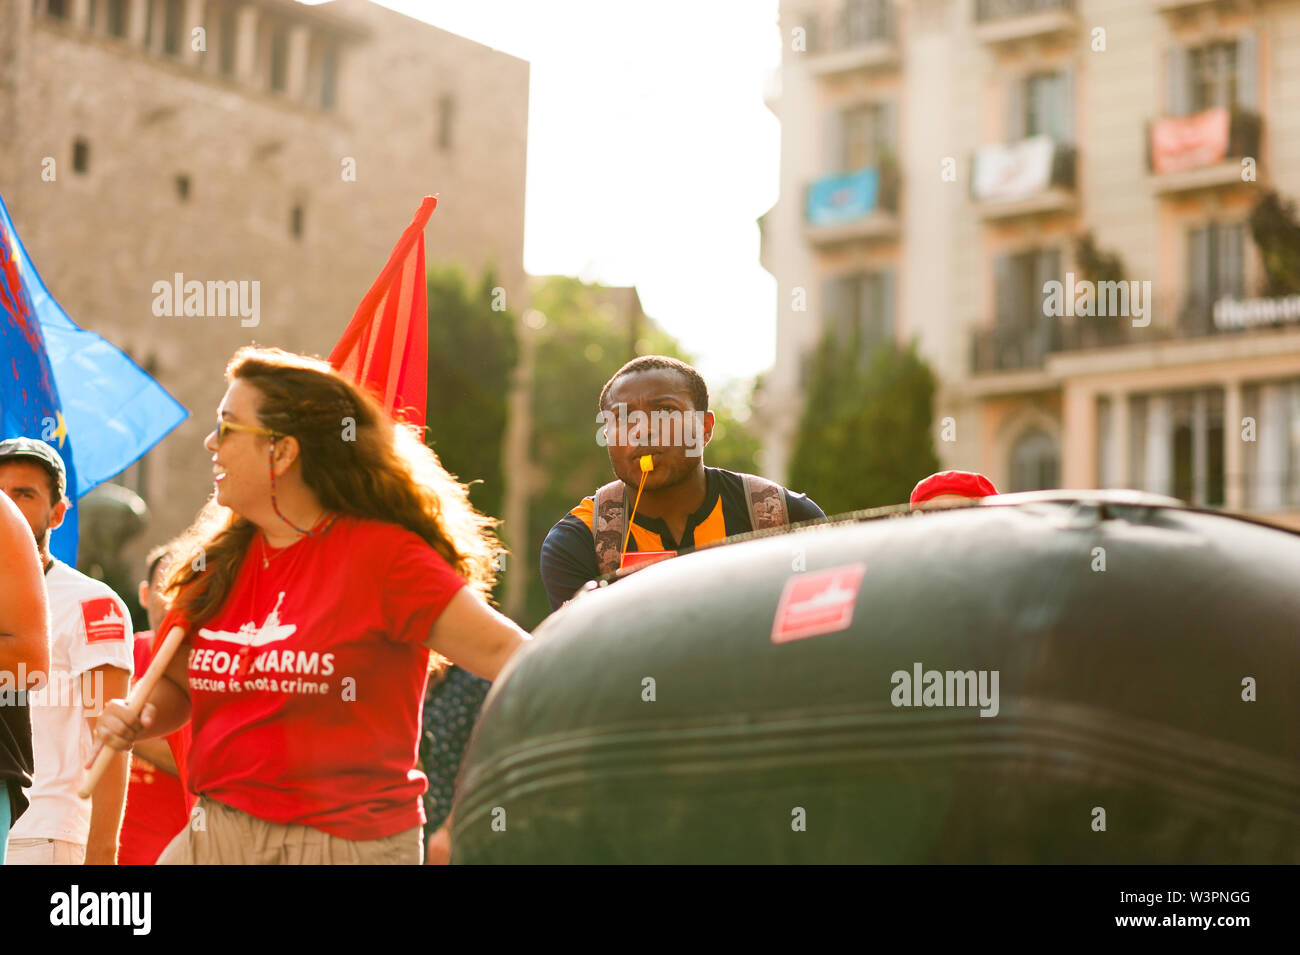 Barcelona, spain- 17 july 2019: young open arms african migrant march holding rubber dinghy and italian minister Salvini mask against immigration poli Stock Photo